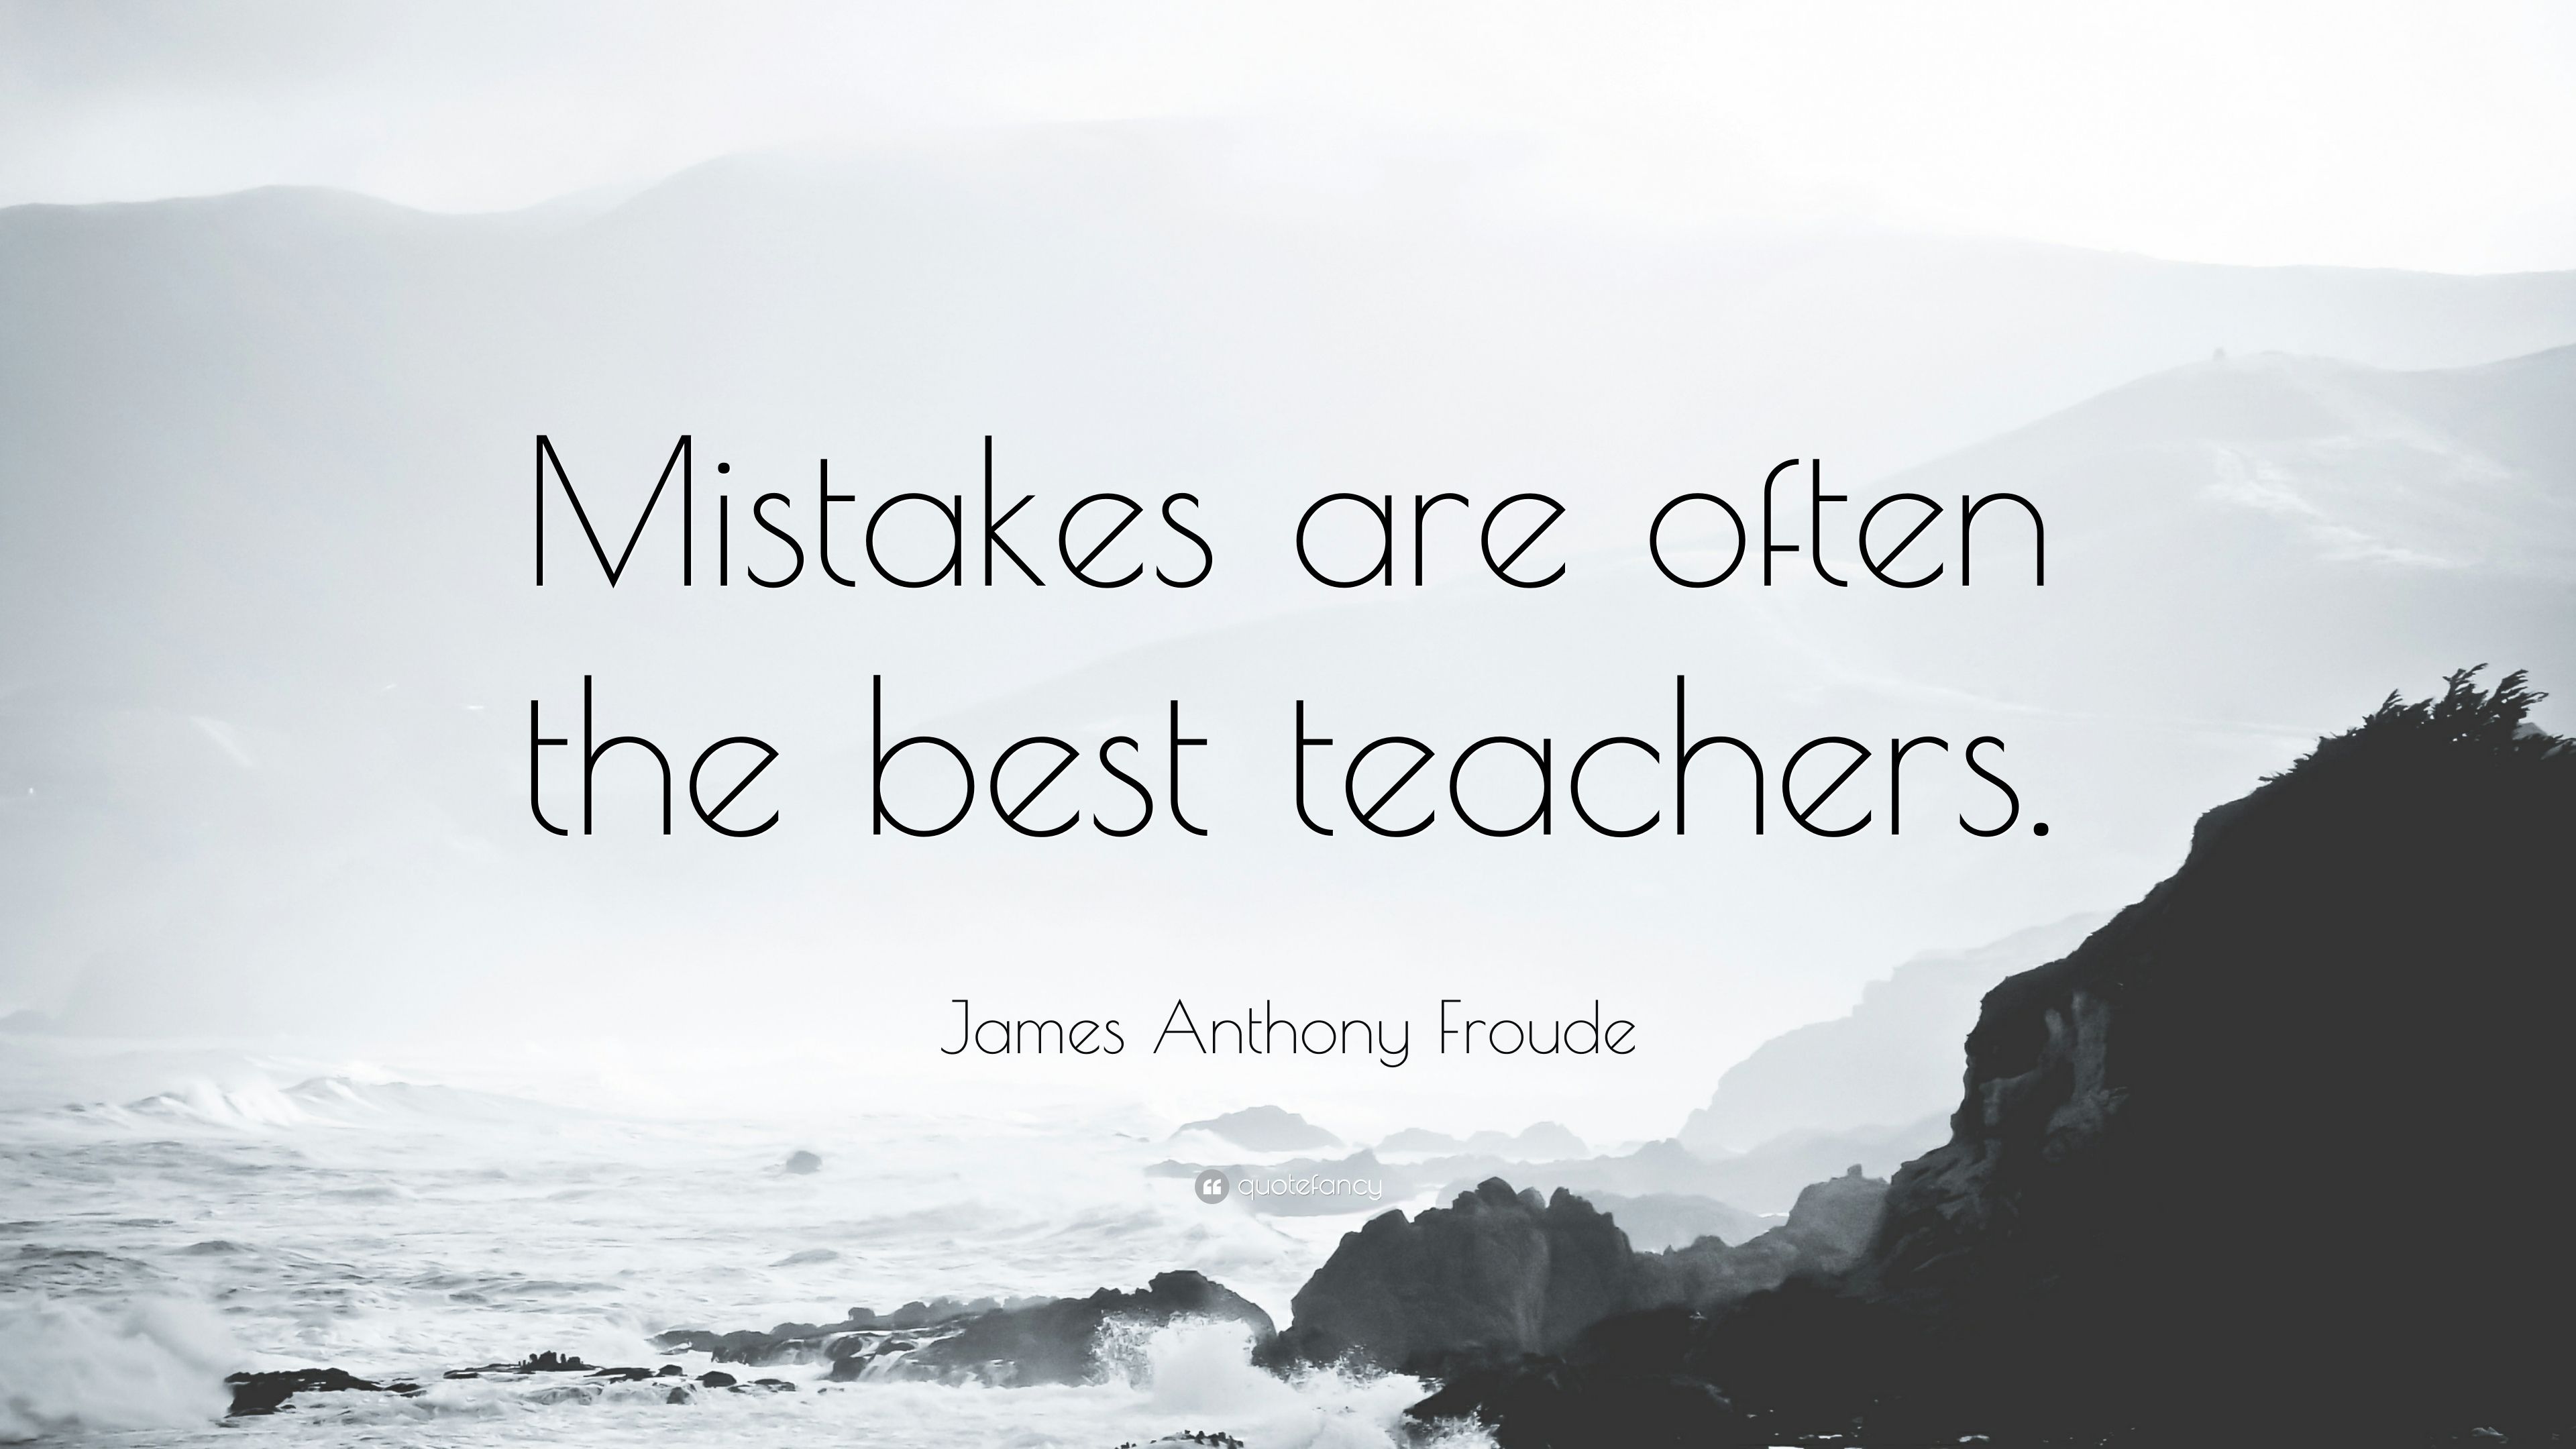 James Anthony Froude Quote: “Mistakes are often the best teachers.” (7 wallpaper)